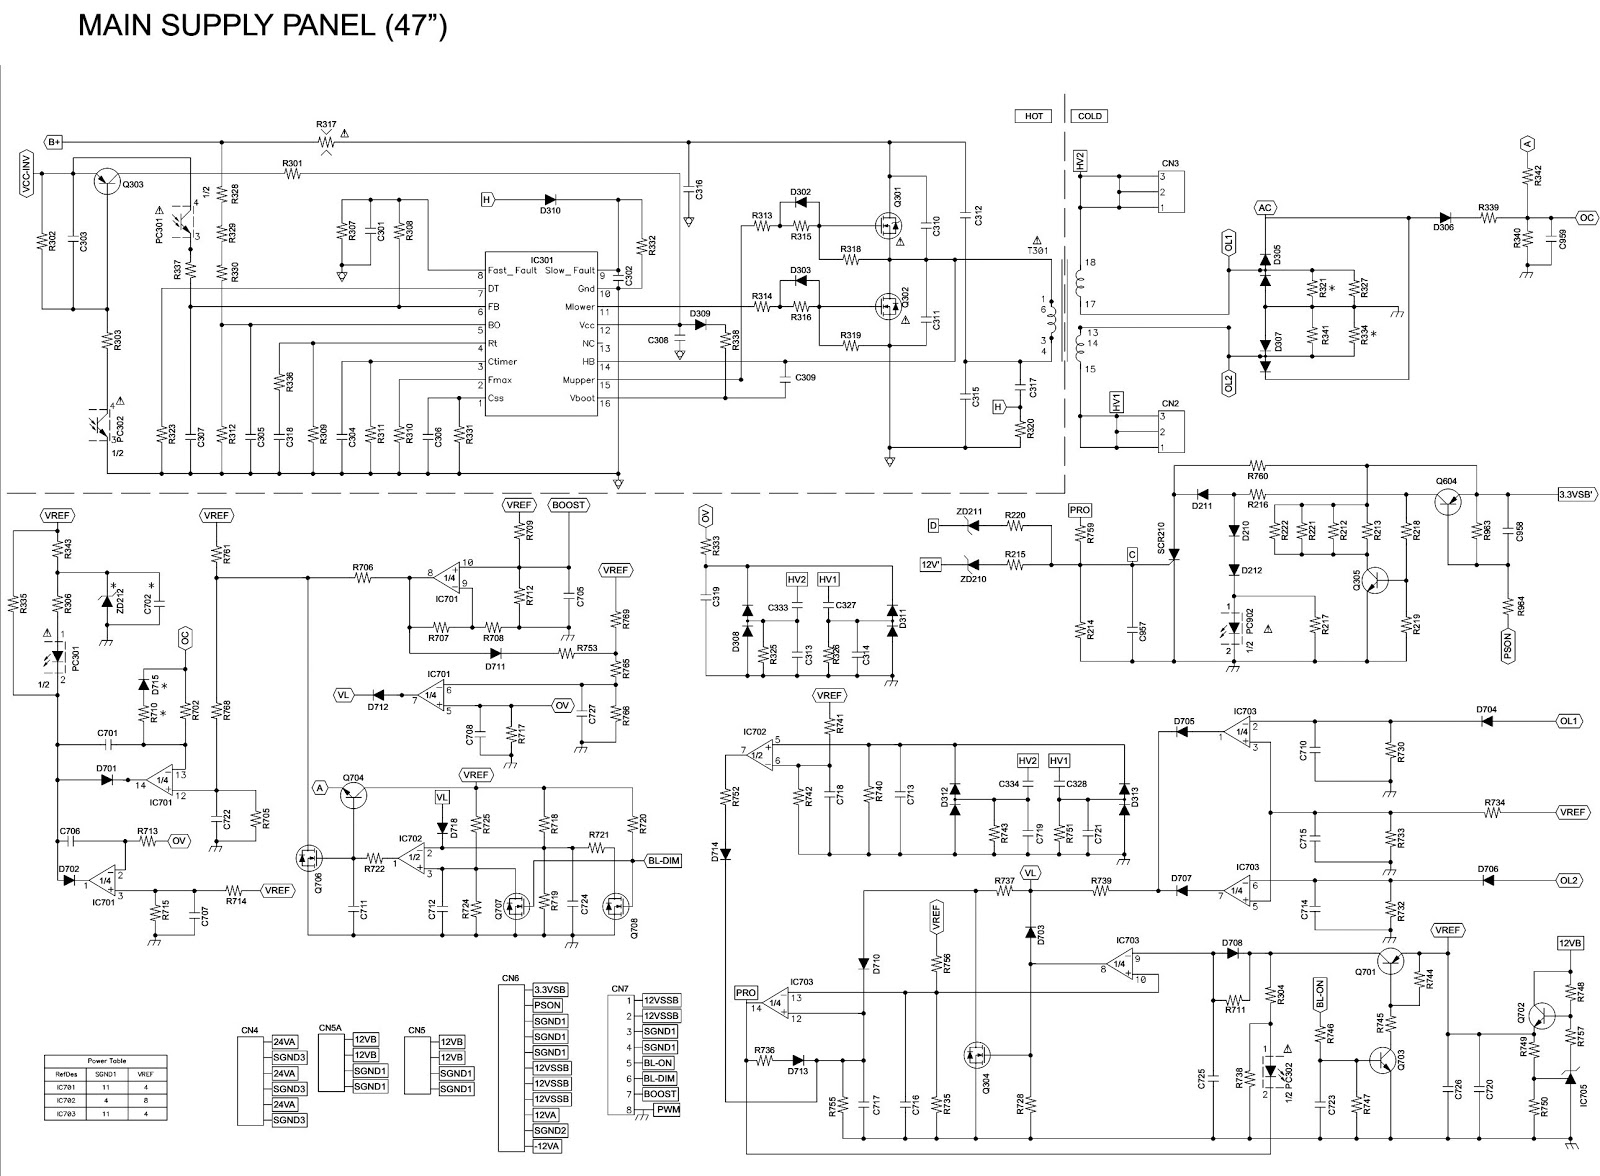 Electro help: PHILIPS 47 inch LCD TV POWER SUPPLY SCHEMATIC